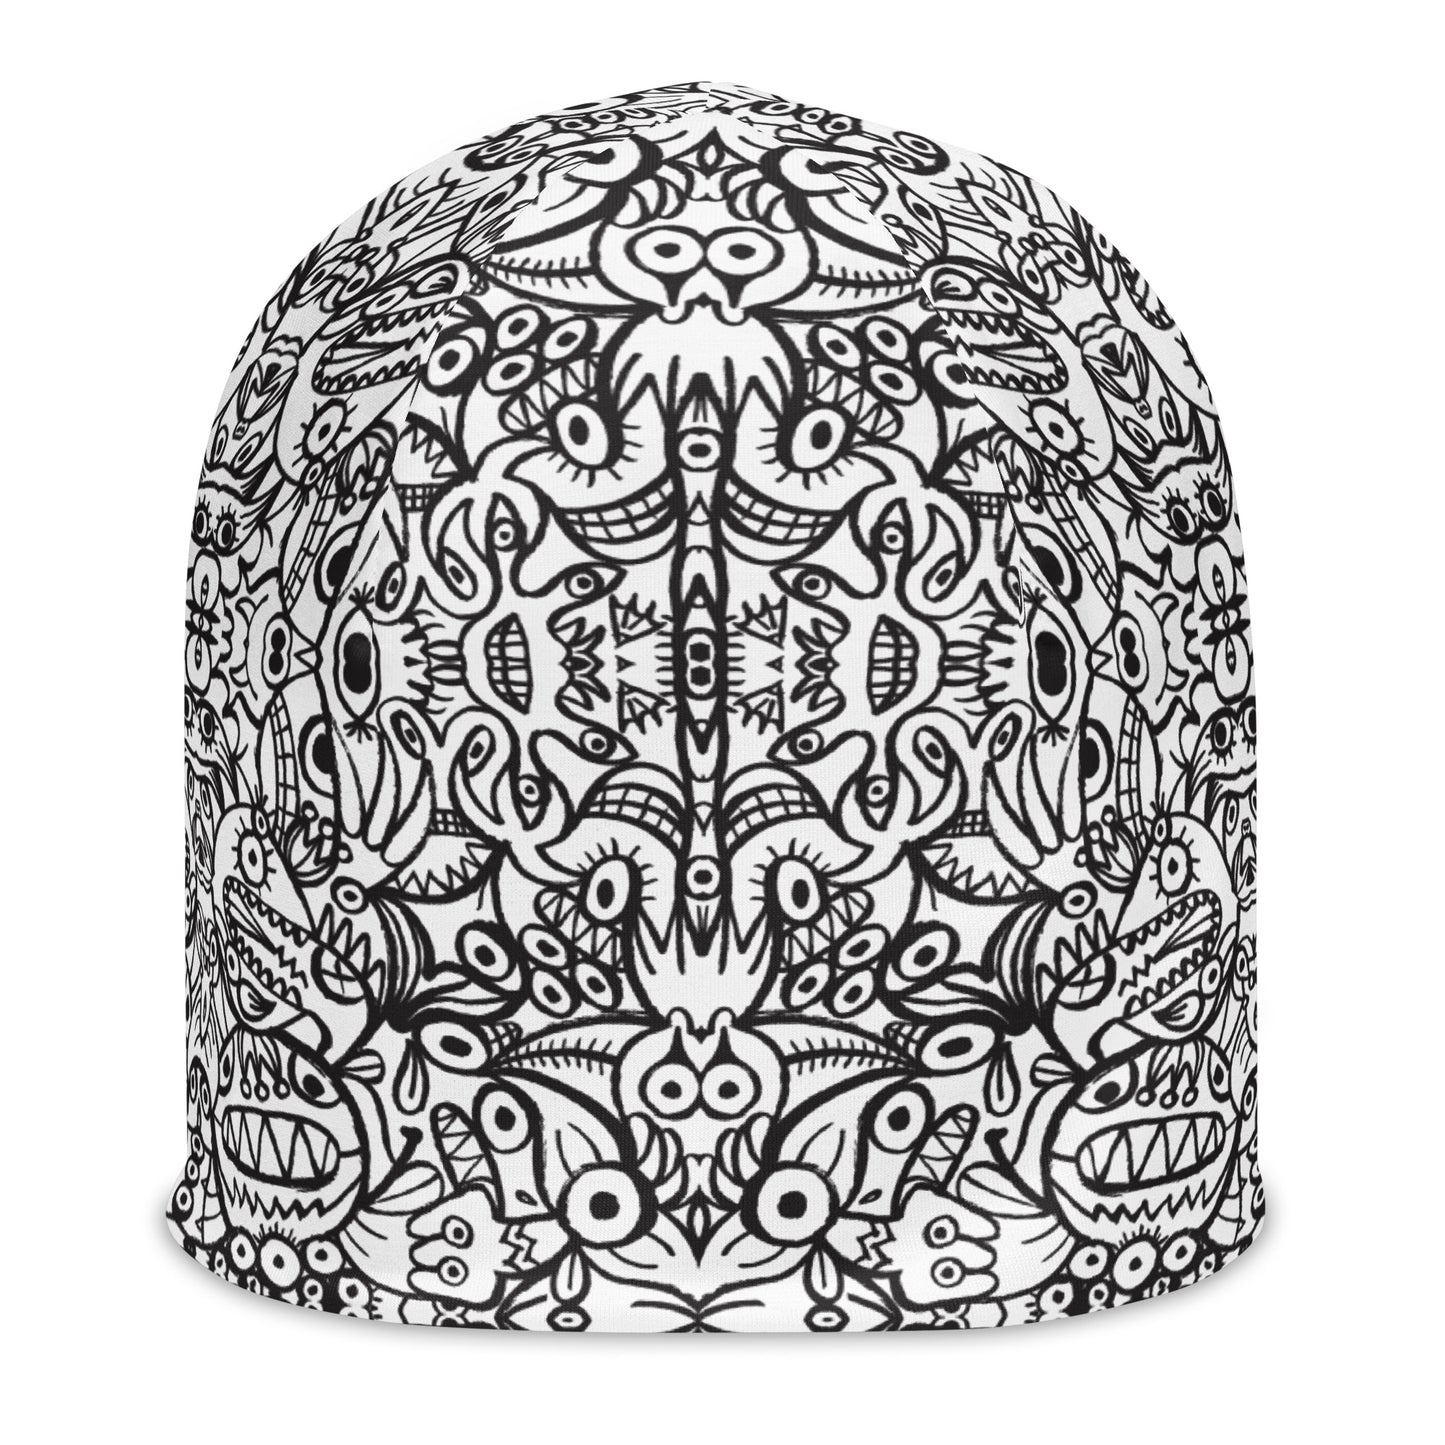 Brush style doodle critters All-Over Print Beanie. Product details